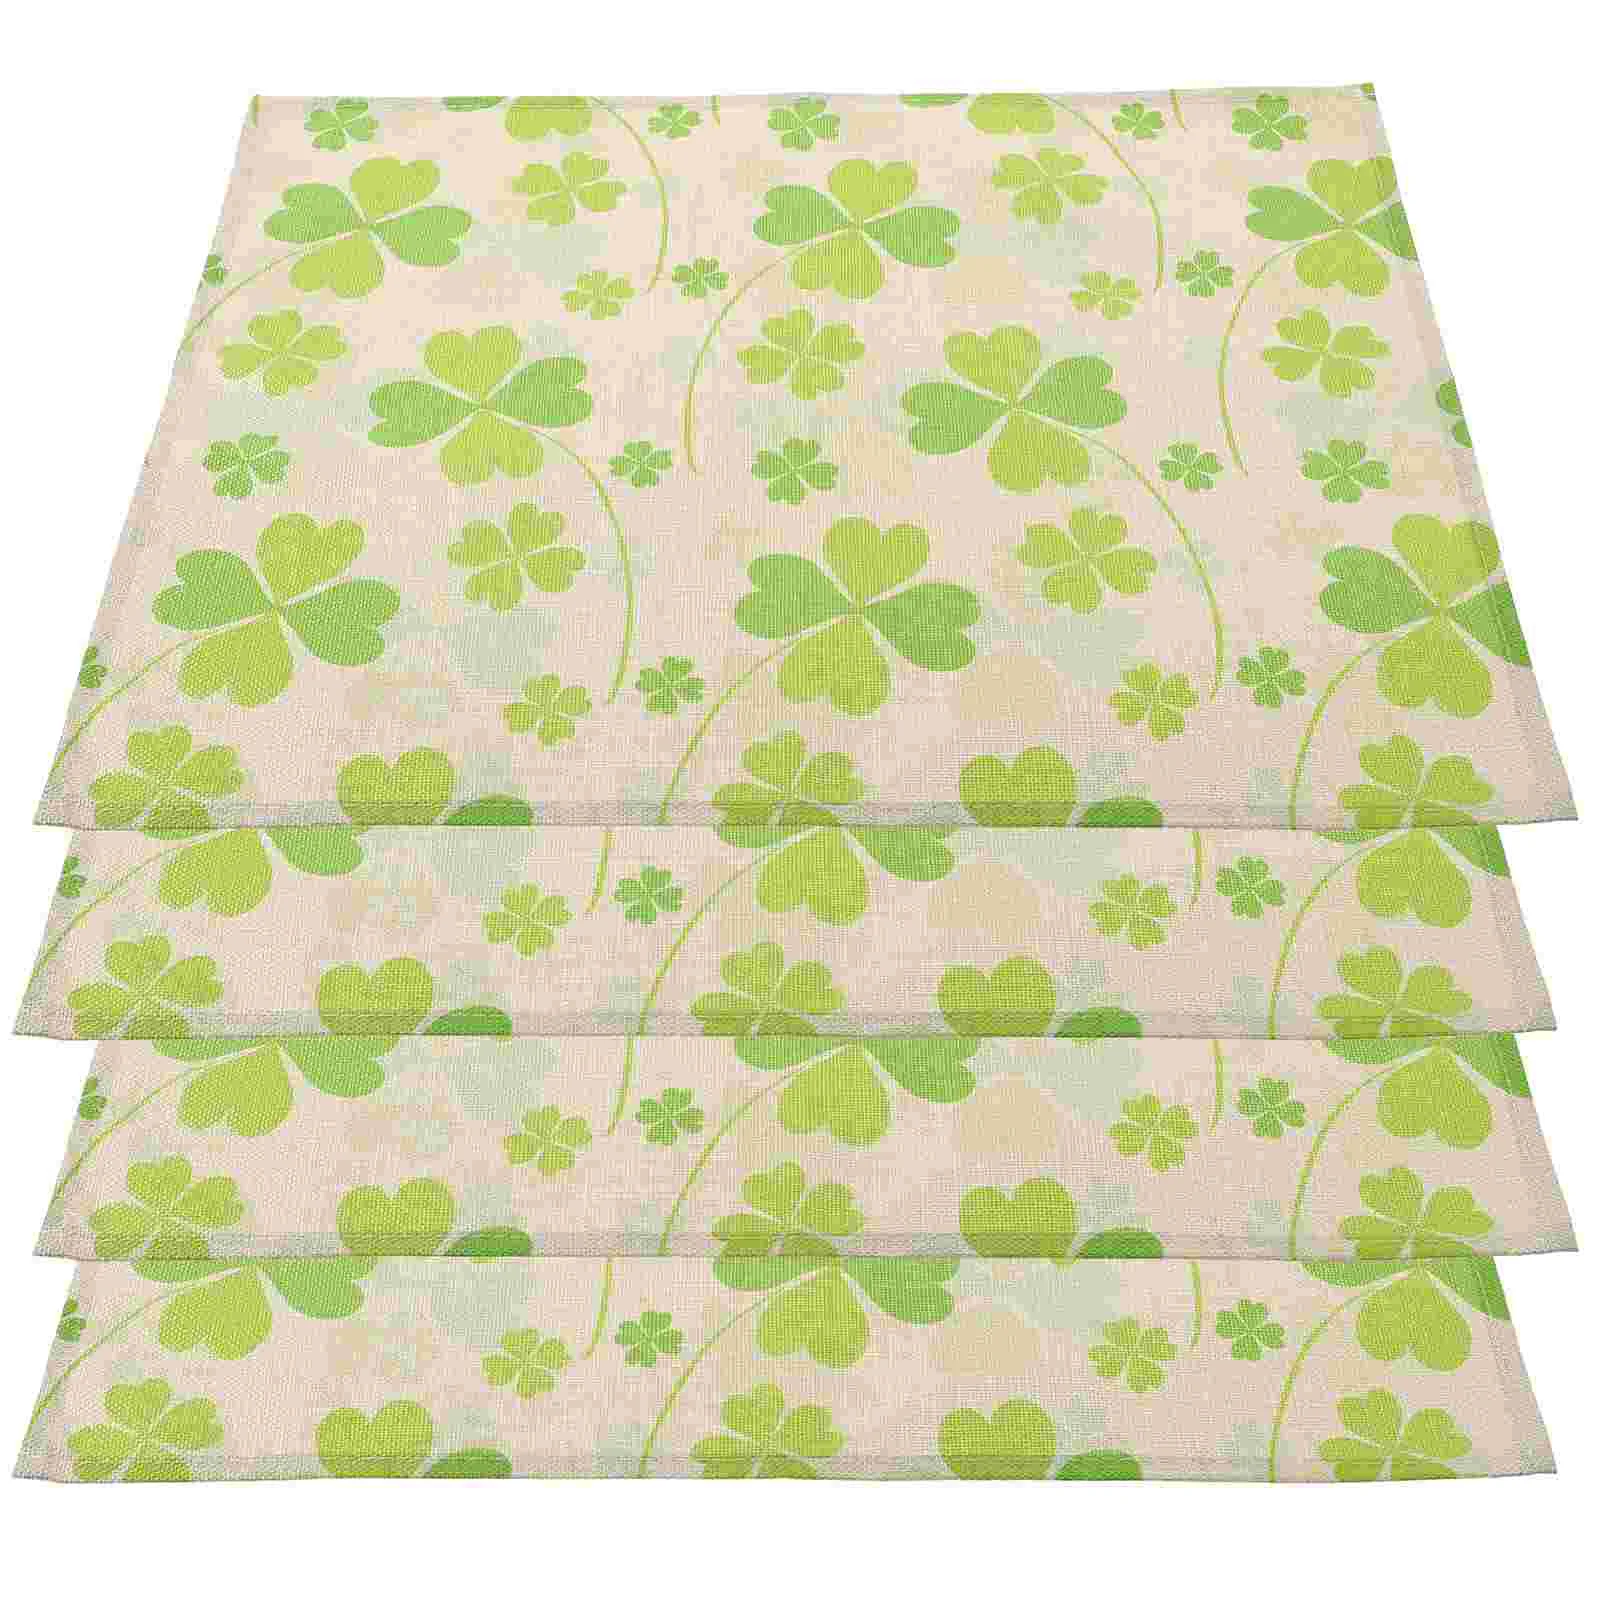 

4pcs Novelty Delicate Decorative Shamrock Tablemats Shamrock Table Covers St Patrick's Day Party Supplies